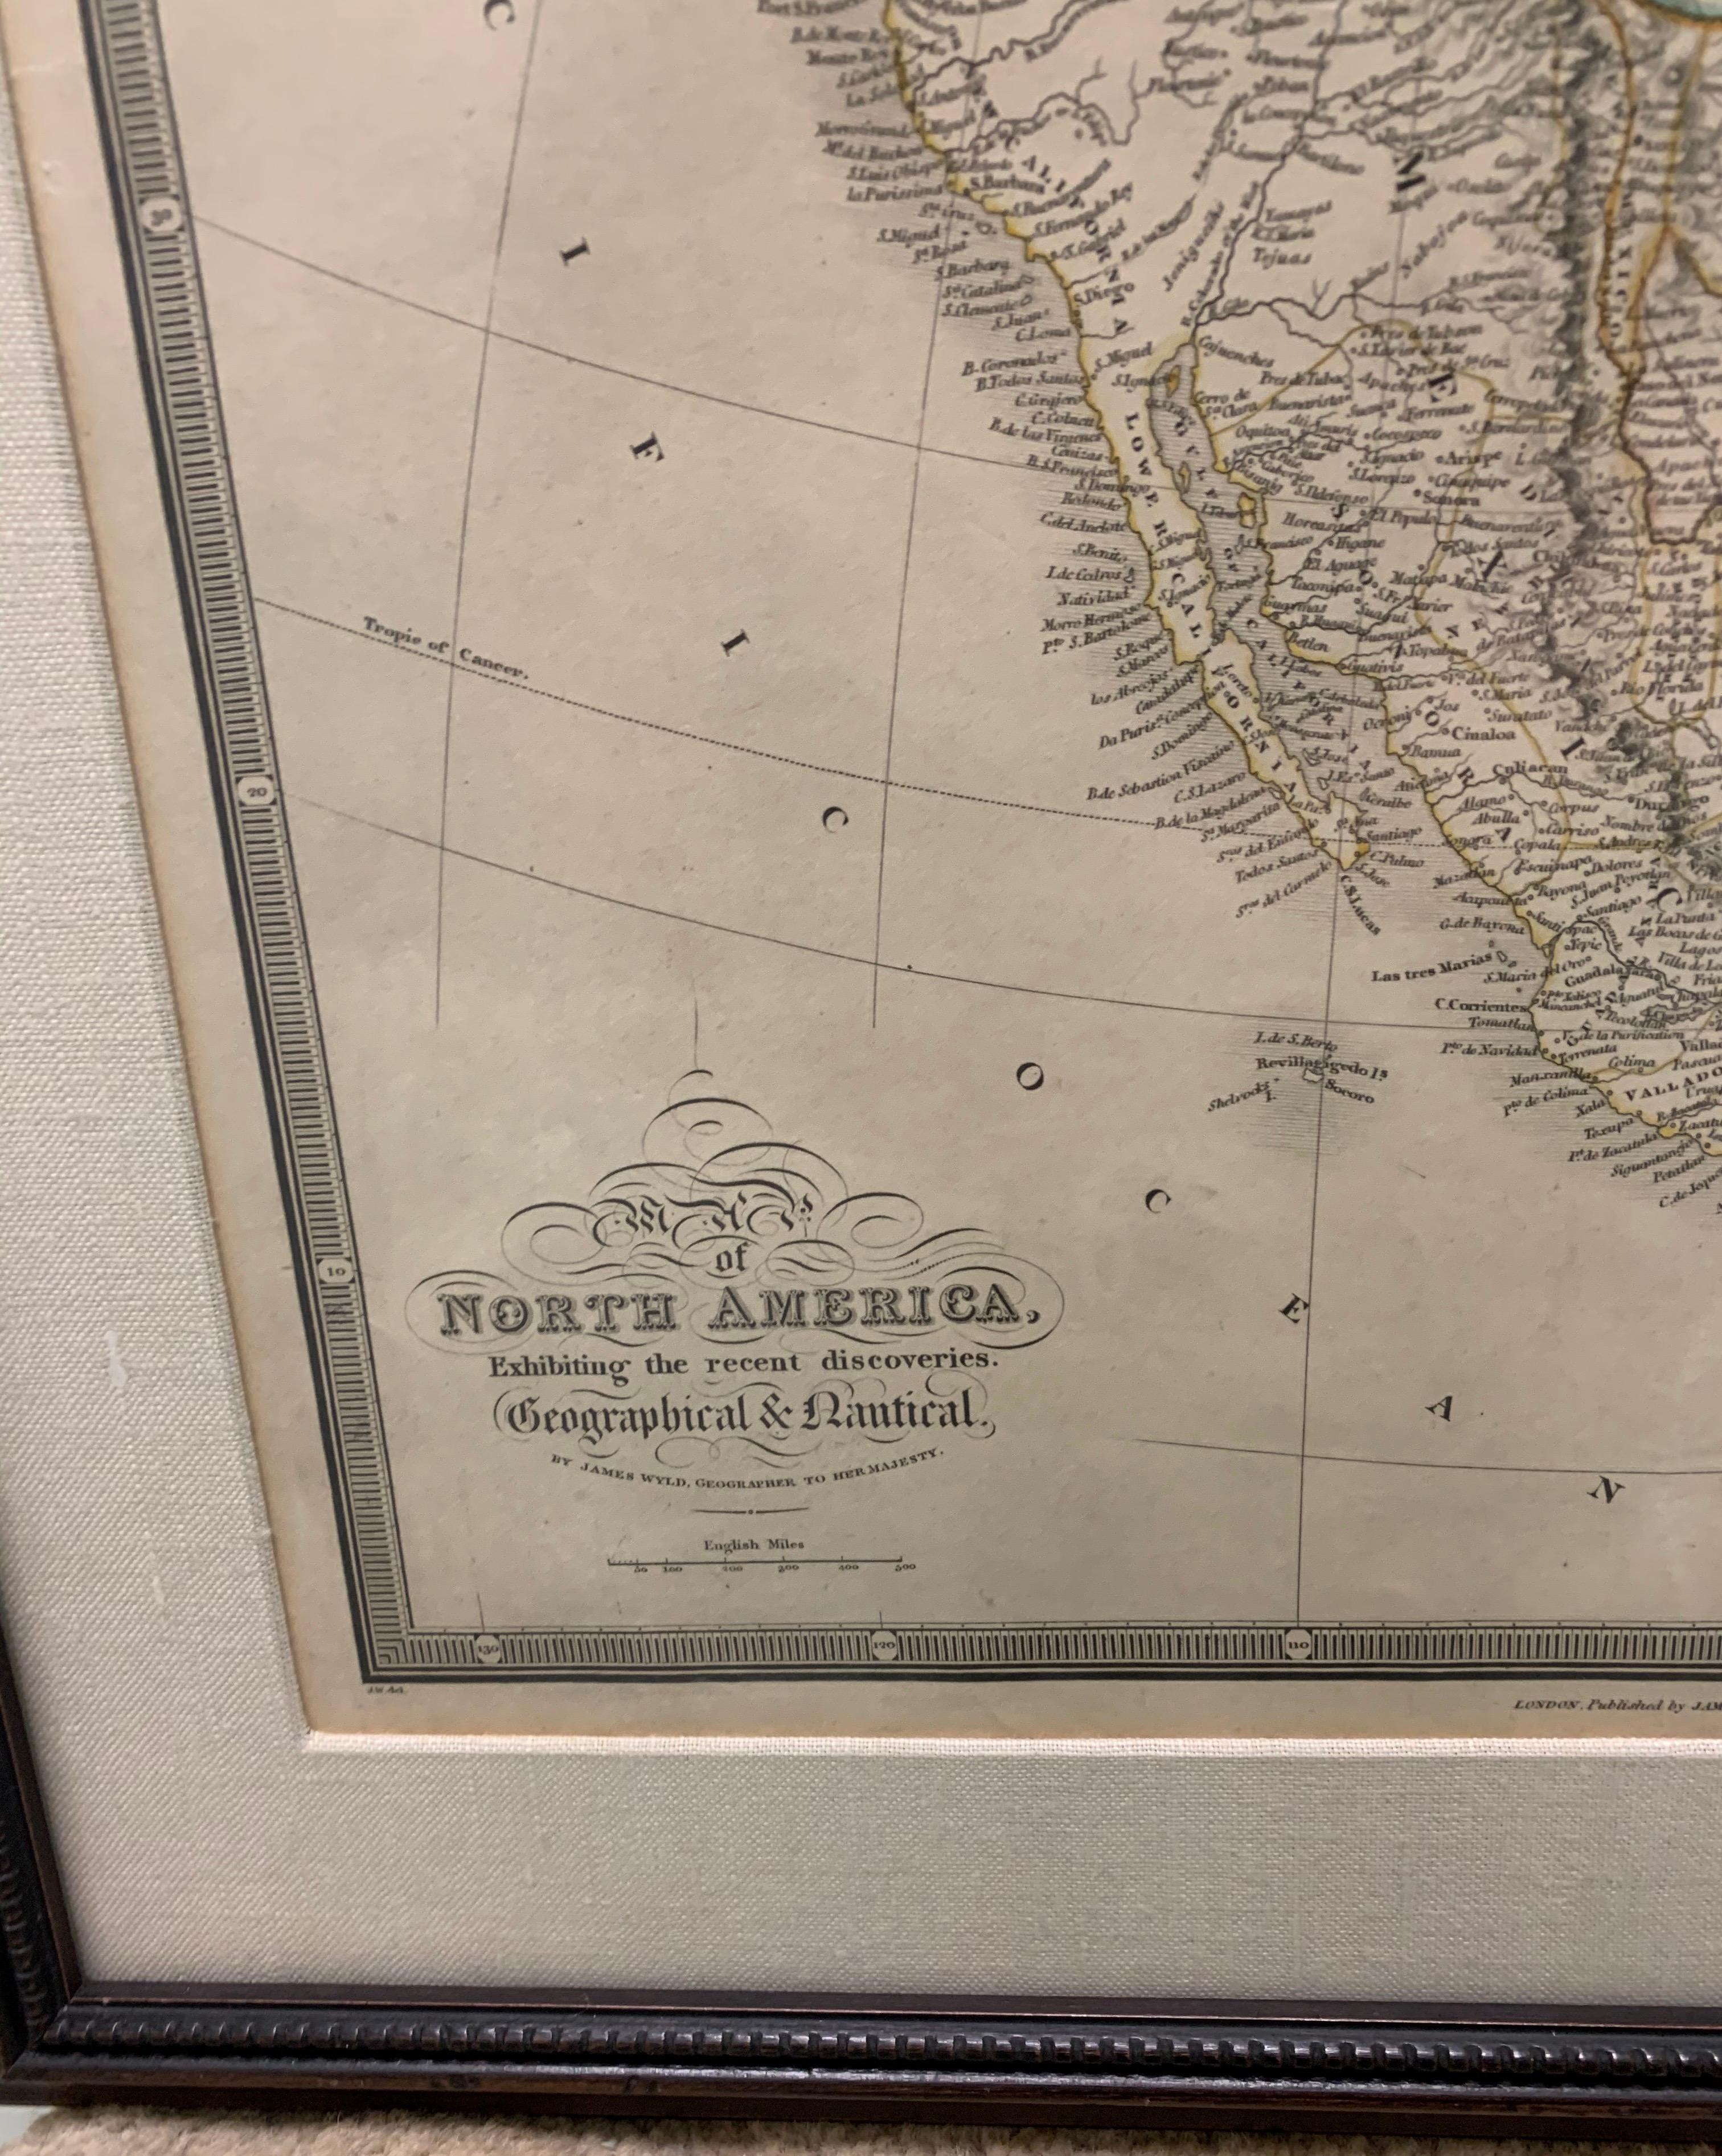 American Framed 1838 North America & Recent Discoveries Map For Sale